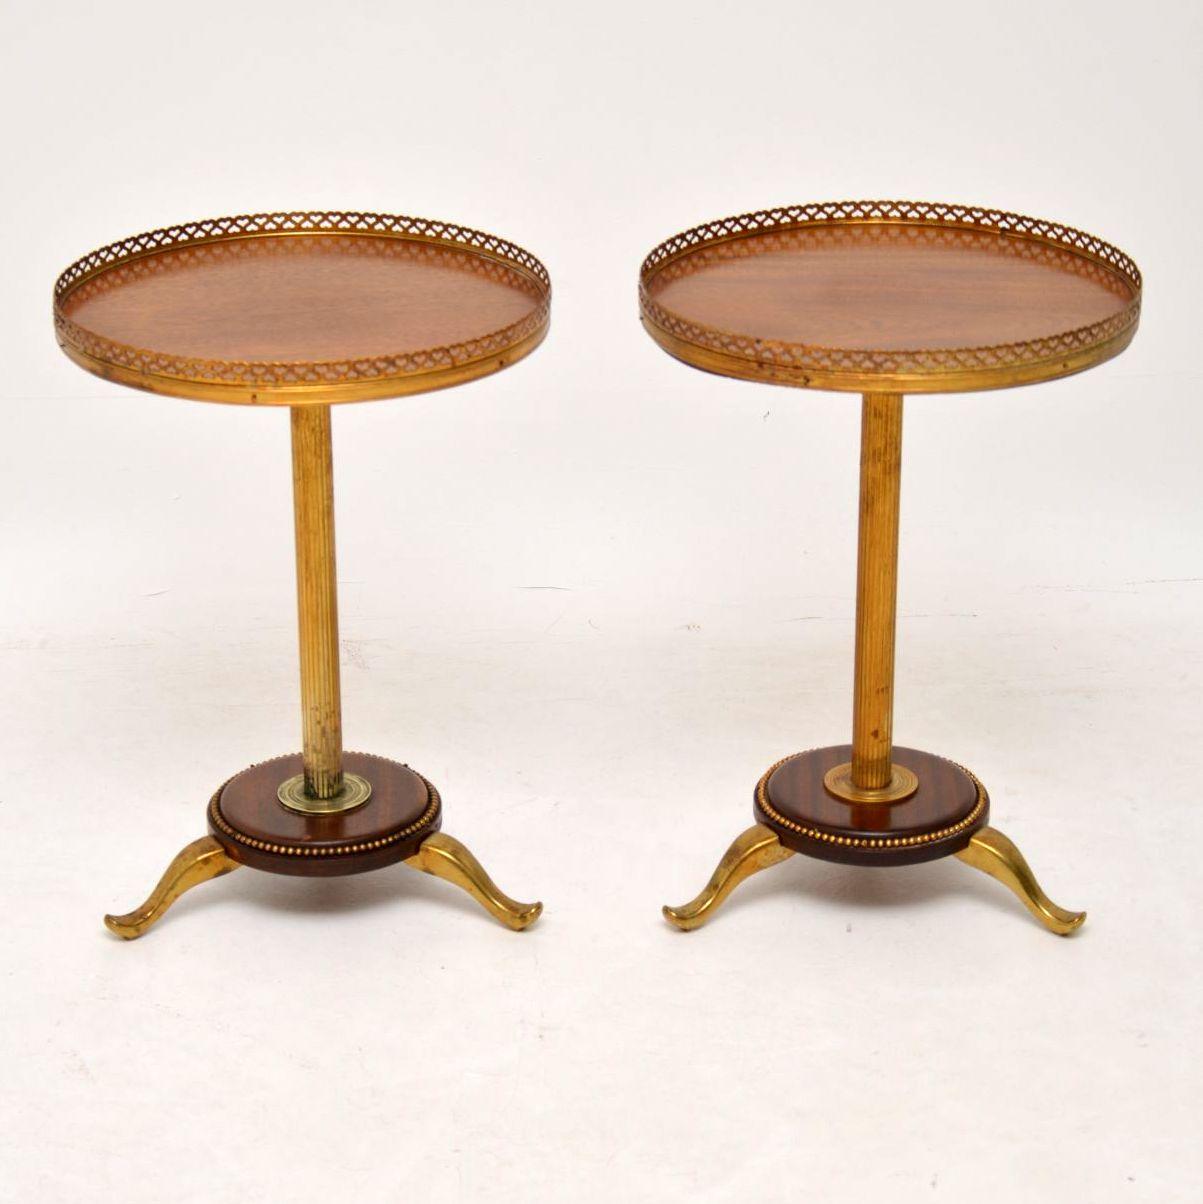 Edwardian Pair of Antique Mahogany and Brass Wine Tables